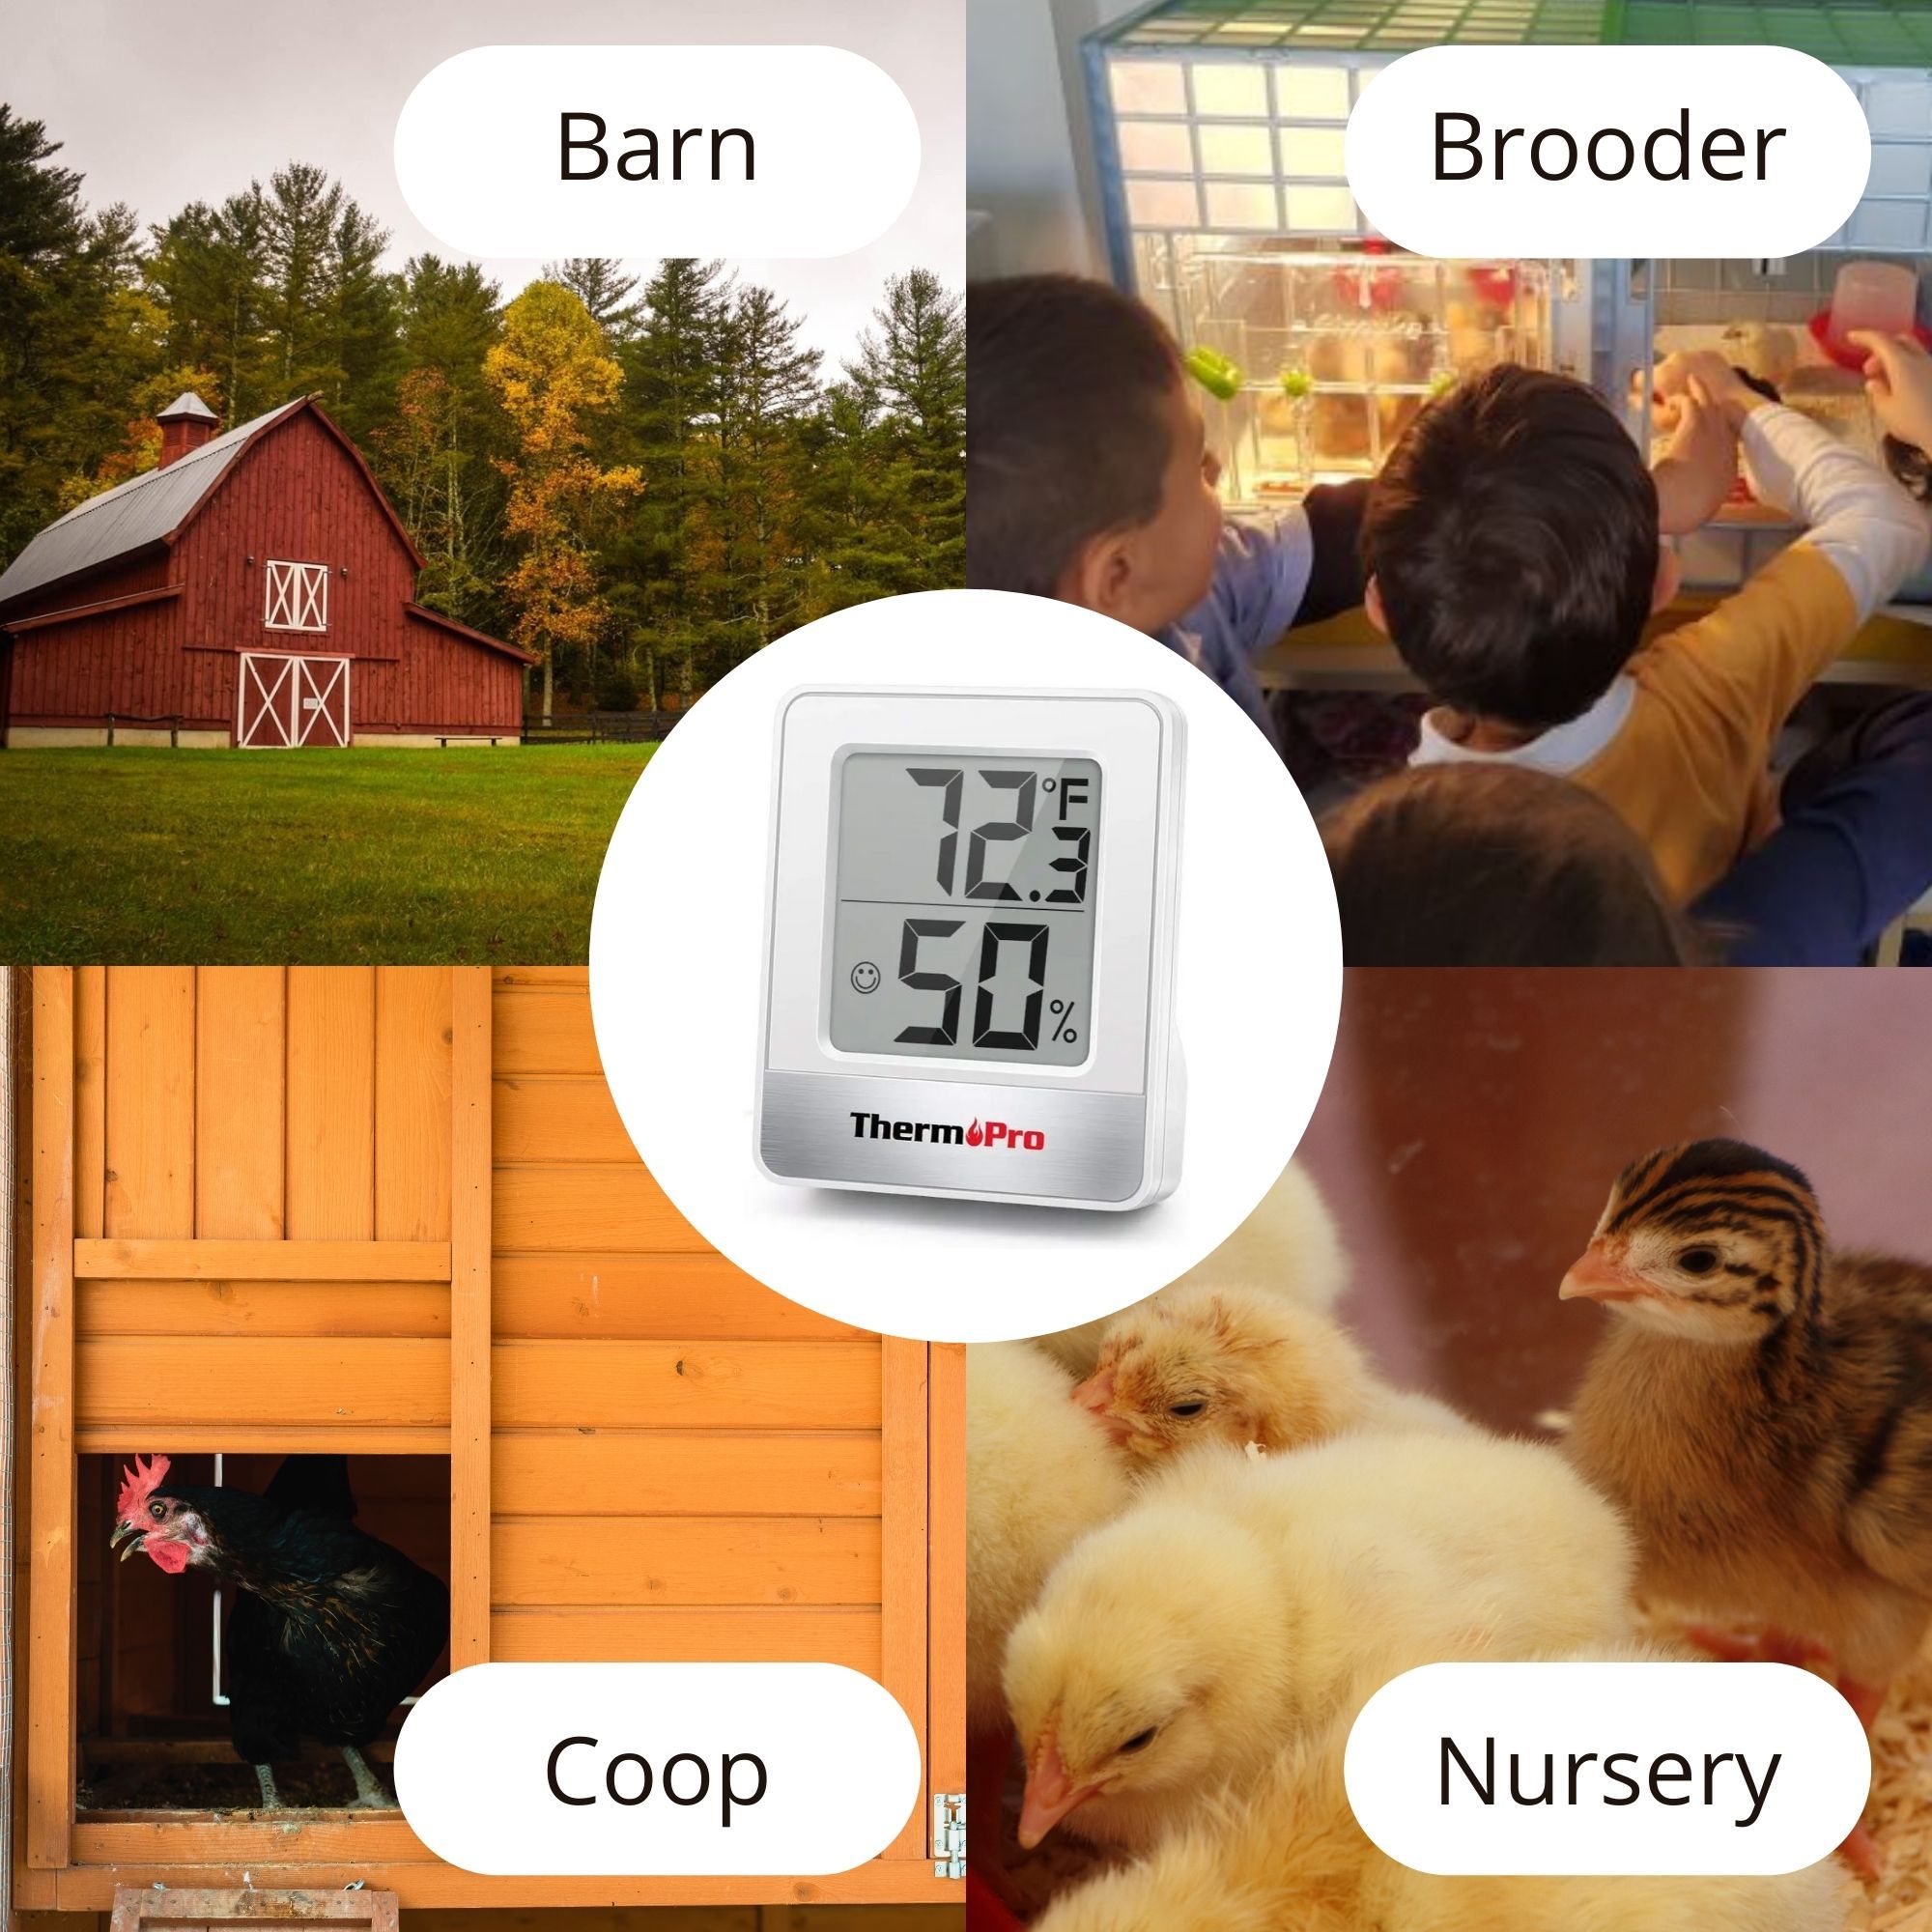 Use thermometer in barn, brooder coop or nursery - Hatching Time